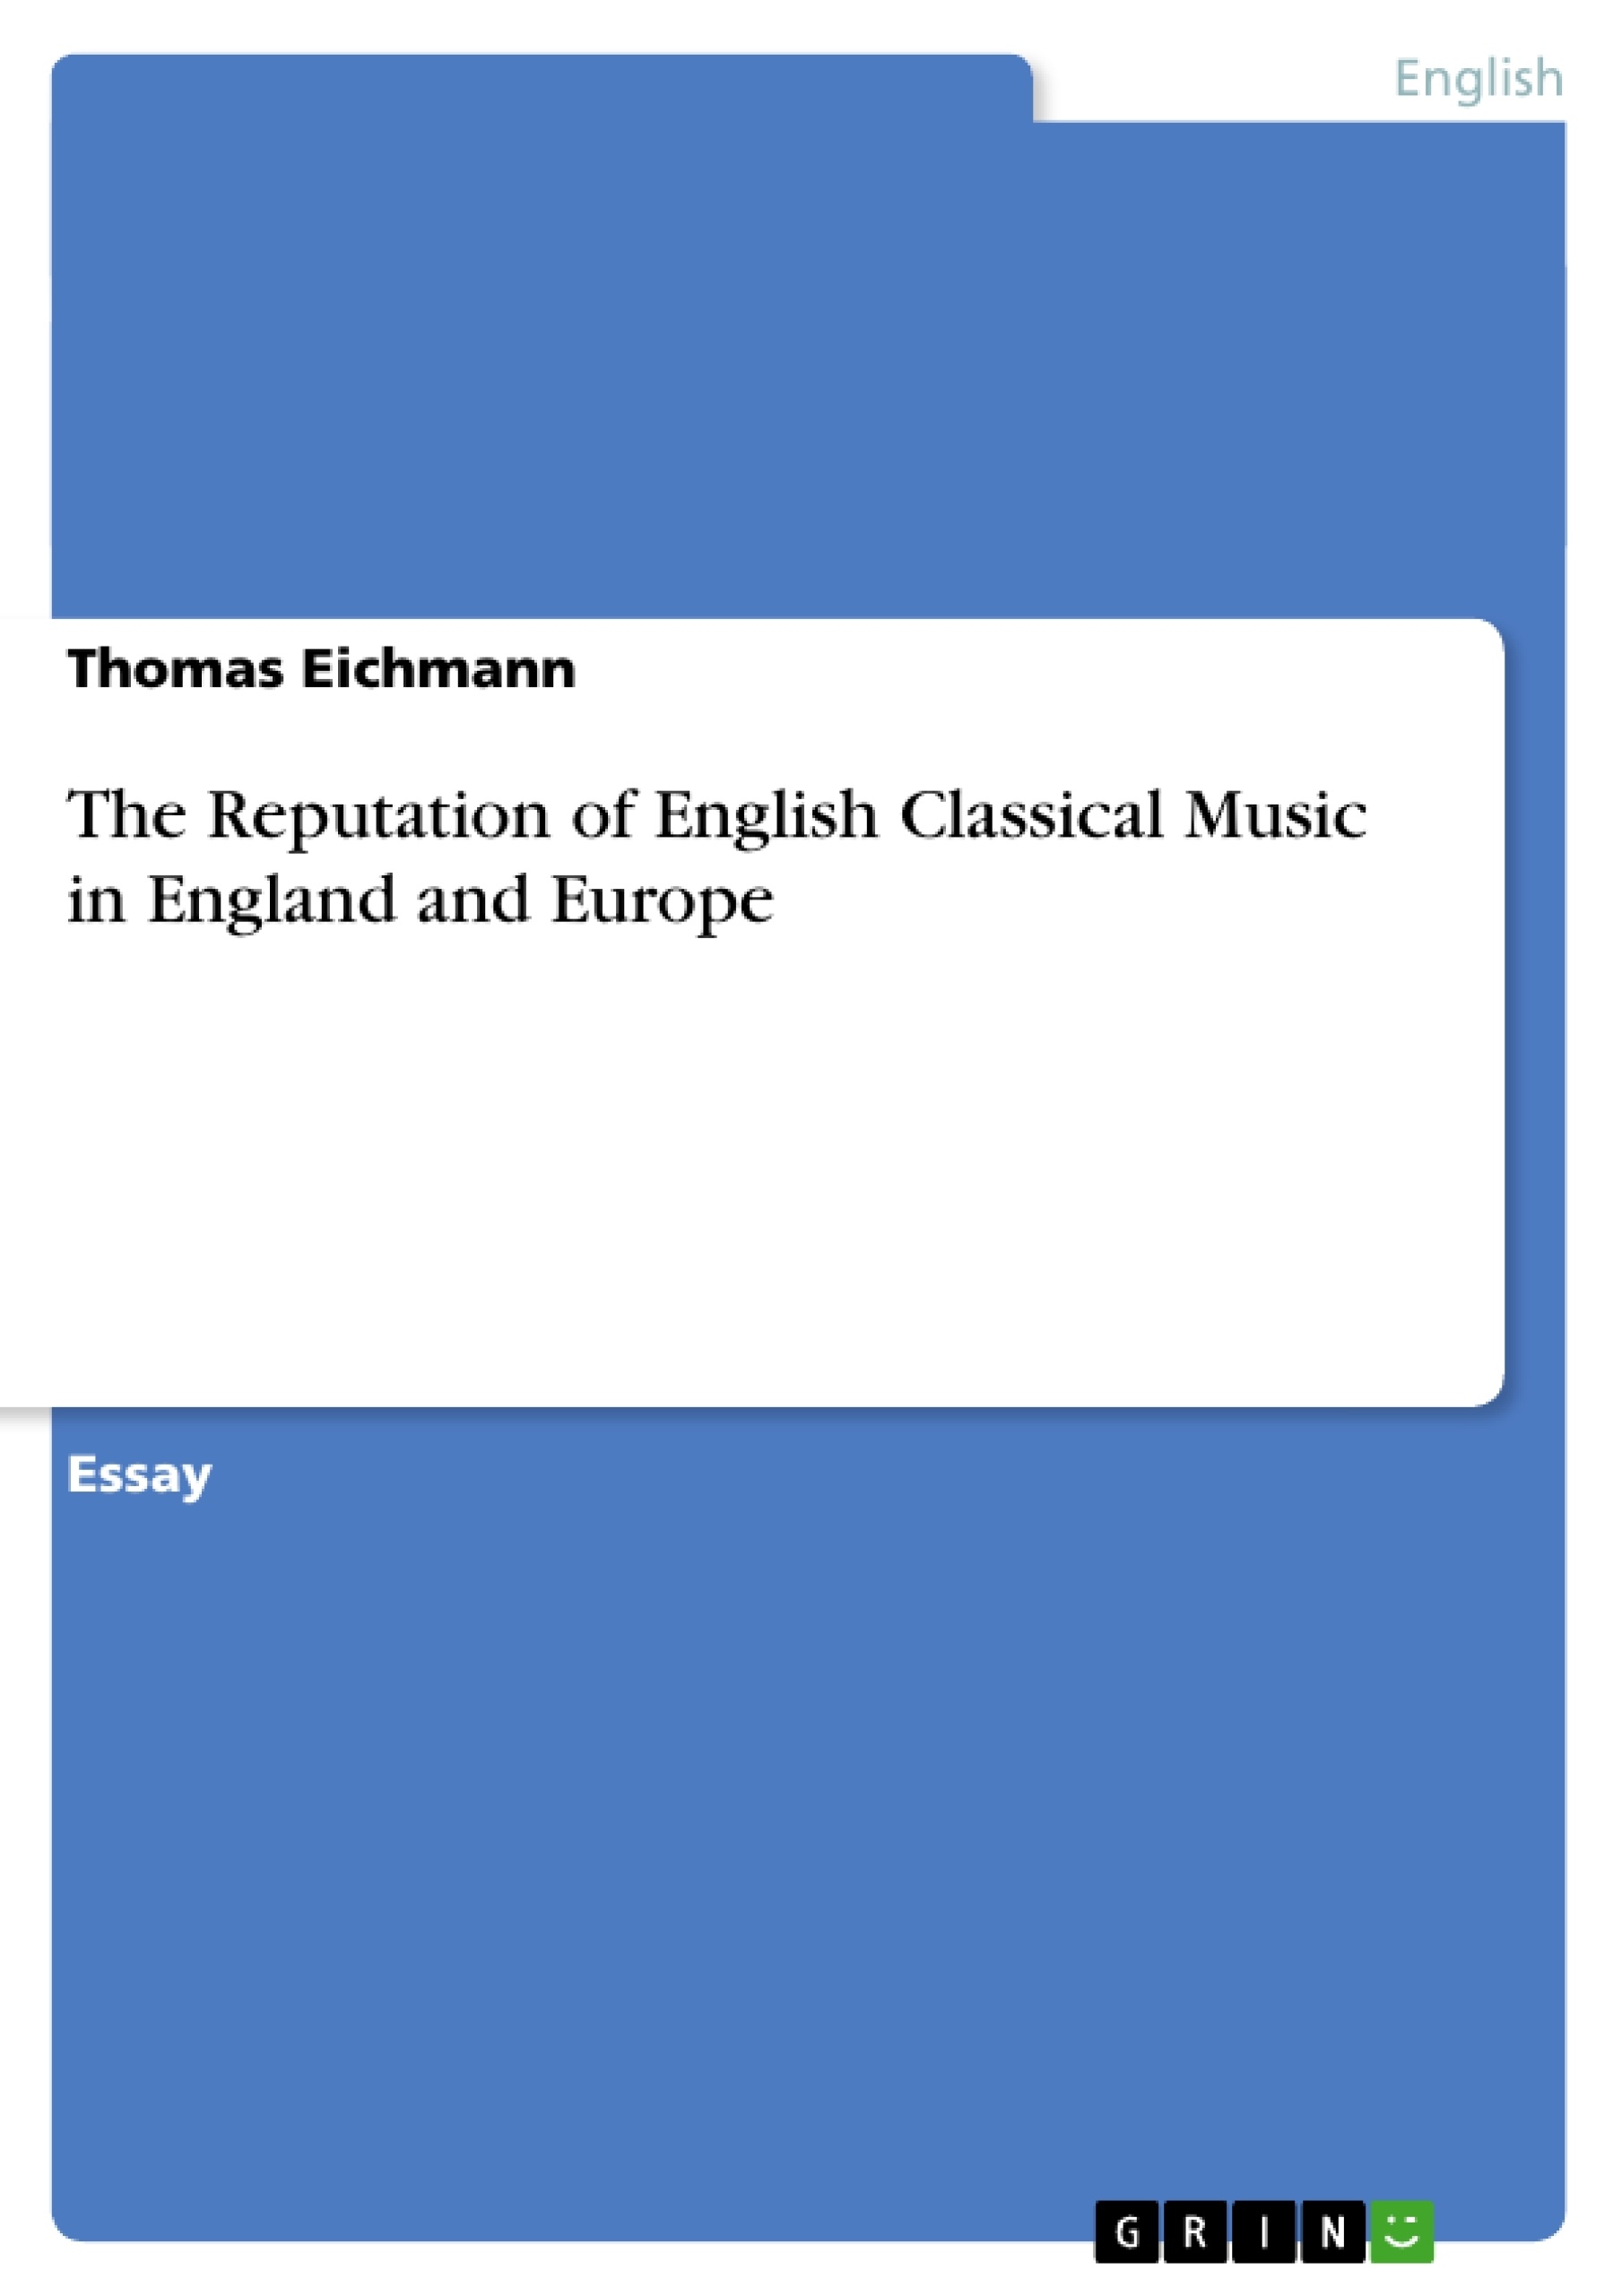 Titre: The Reputation of English Classical Music in England and Europe